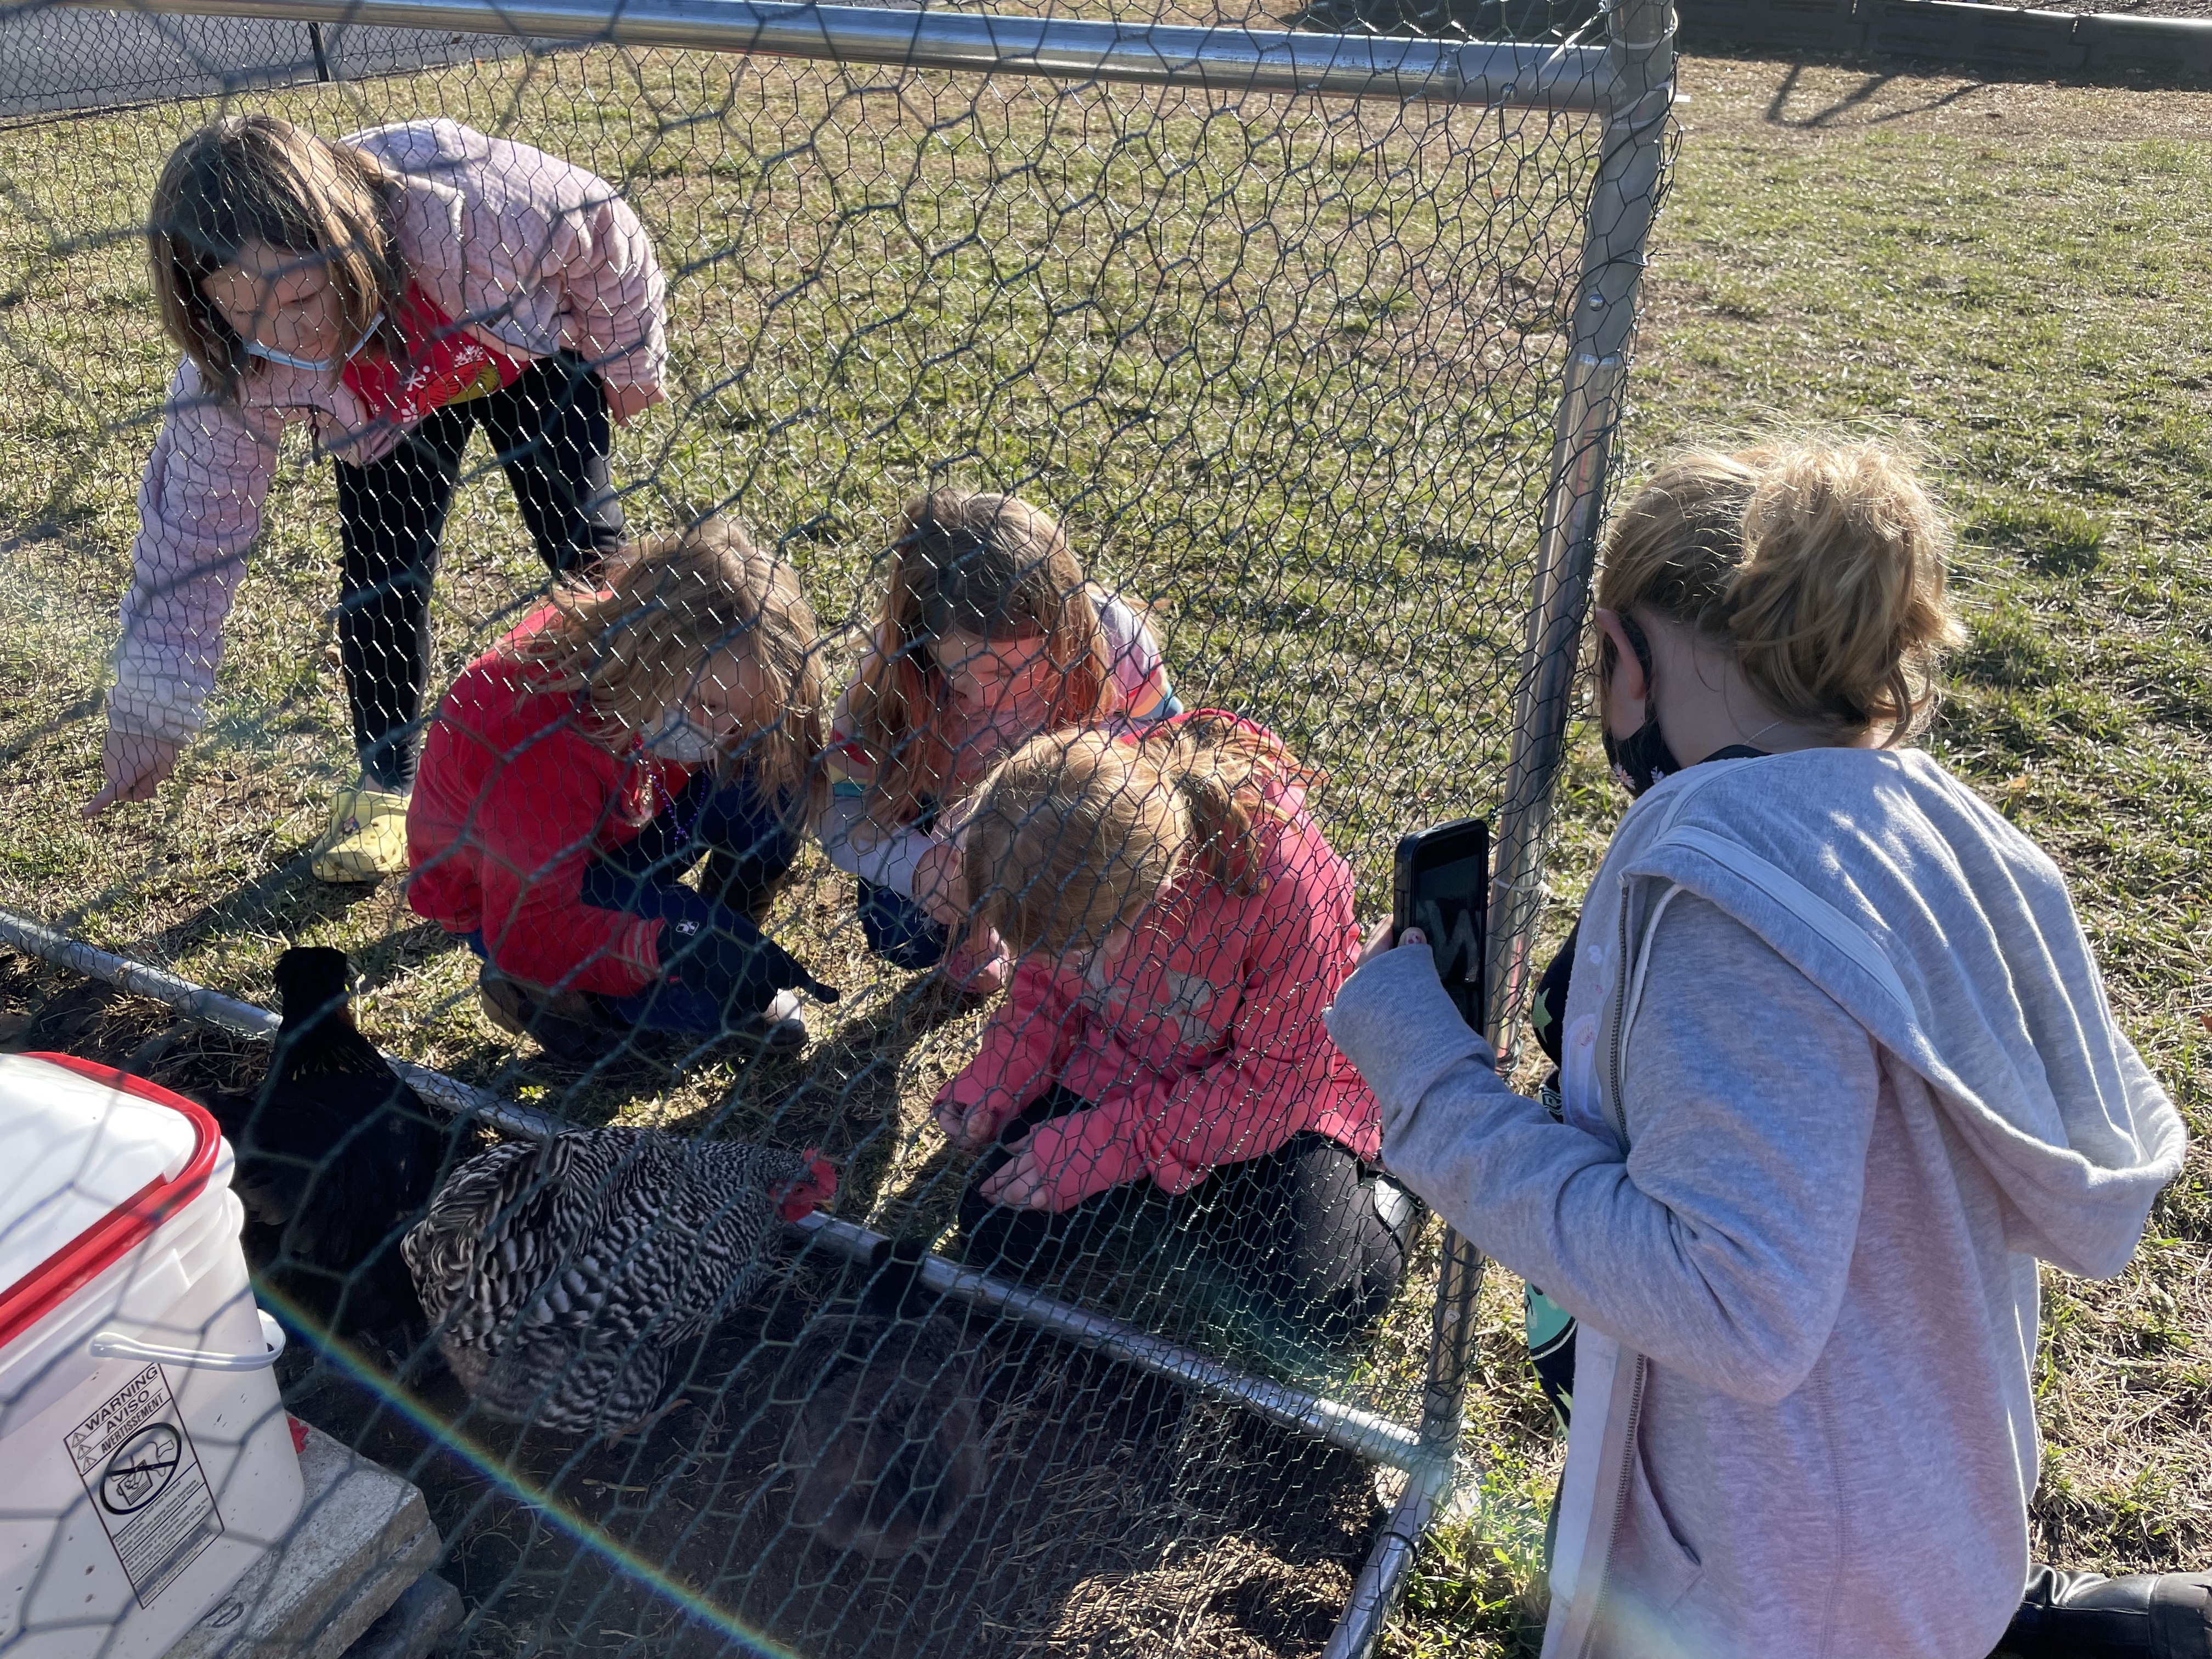 girls playing with chickens in a fenced yard